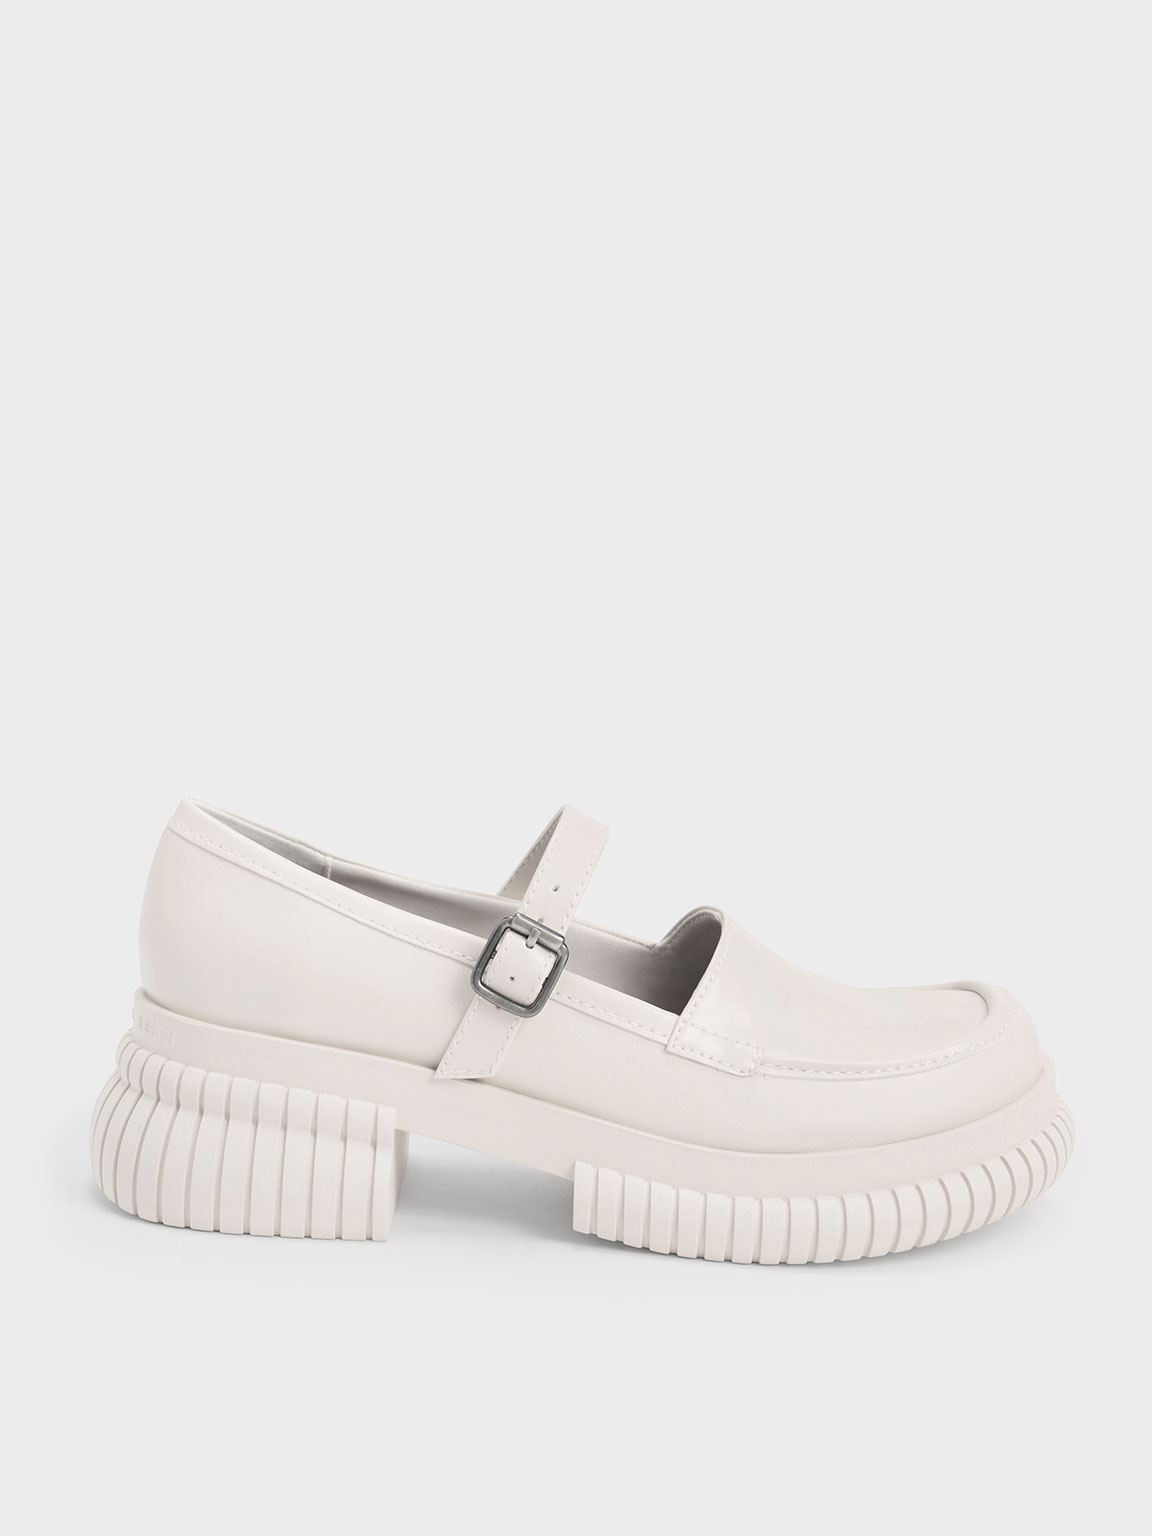 Charles & Keith Buckled Mary Jane Loafers In Chalk